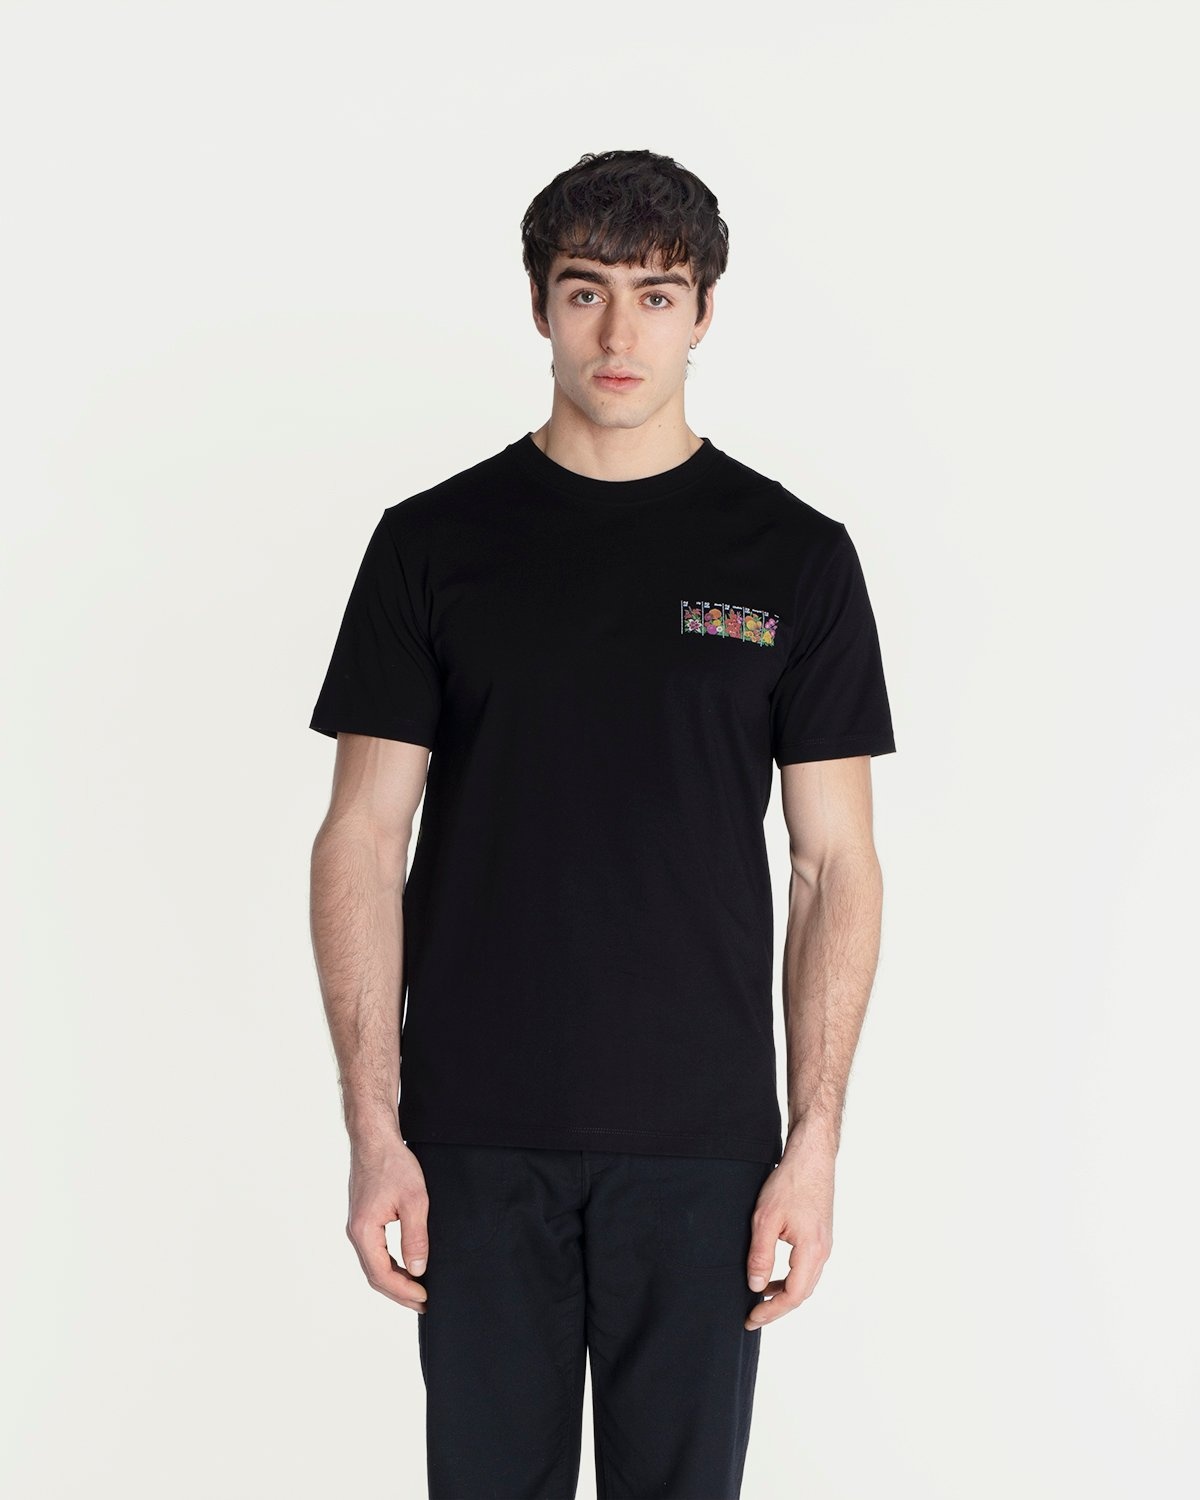 Soulland – Rossell S/S Black - T-shirts - Black - Image 3